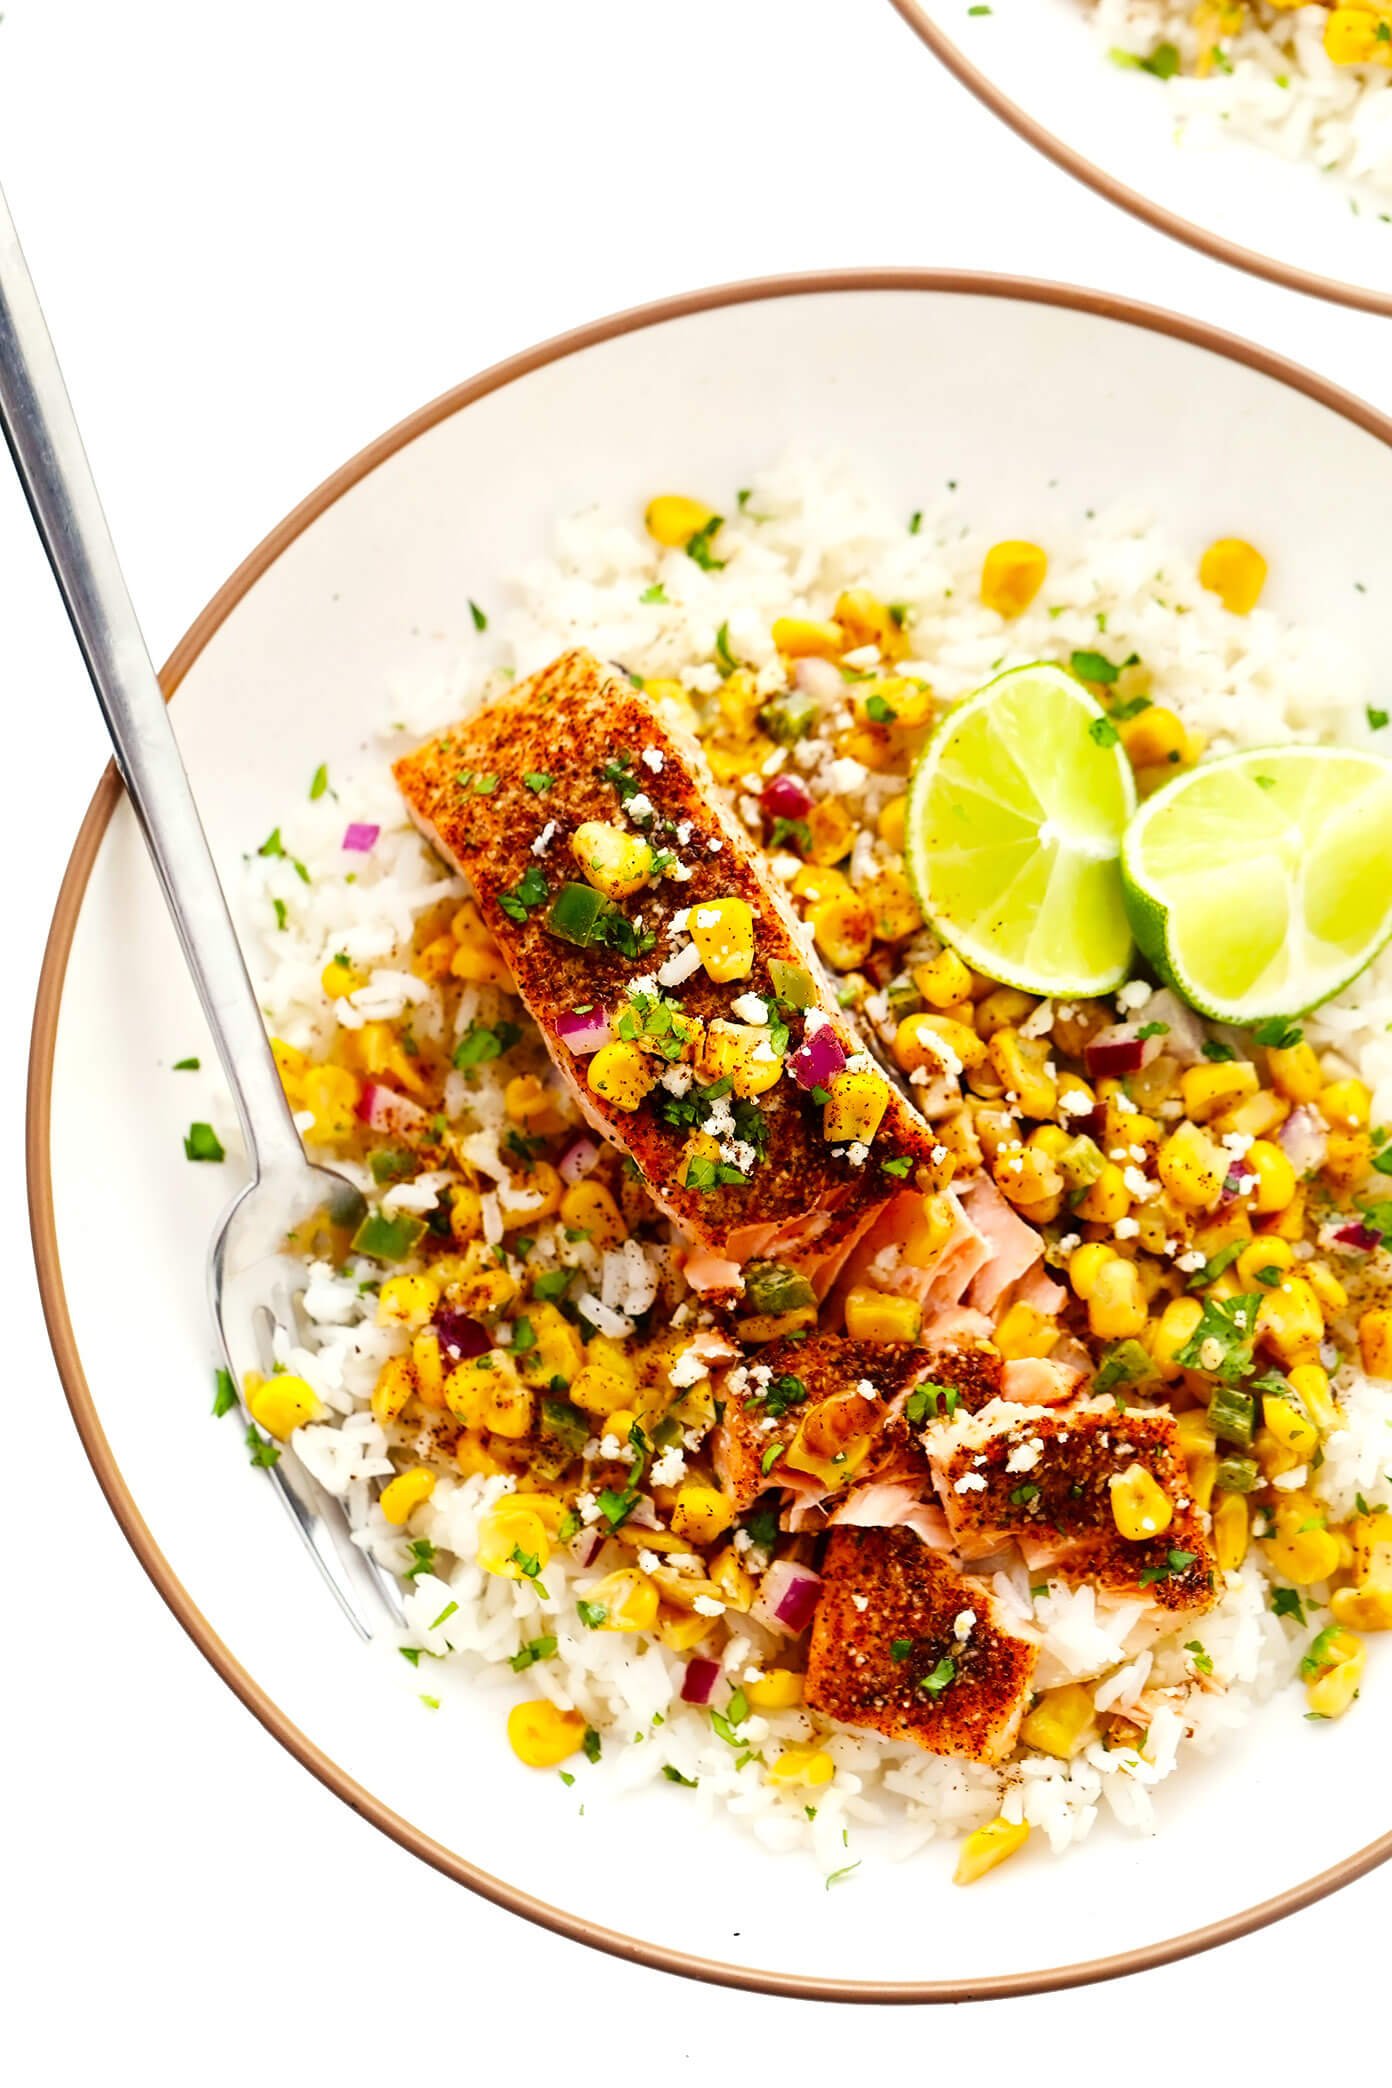 Chili Lime Salmon with Esquites and Rice in Bowl